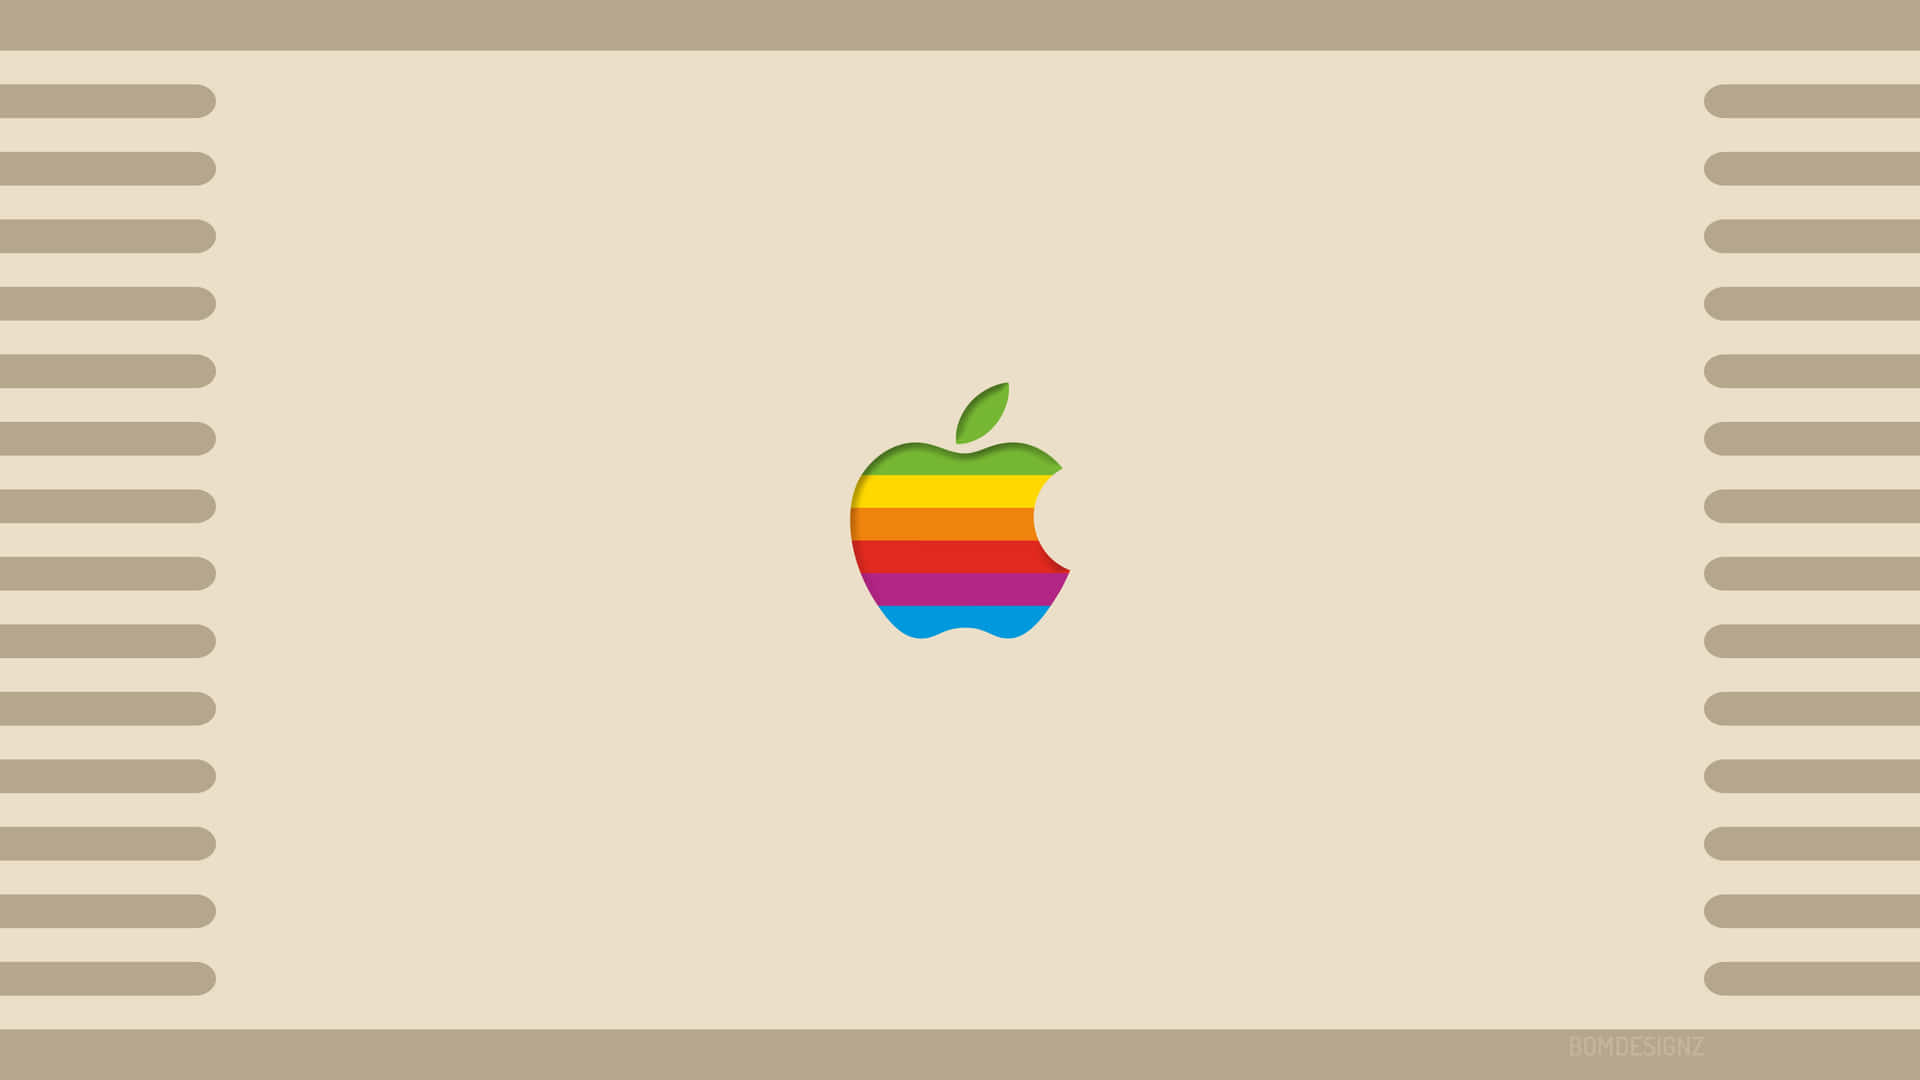 "Inspiration from Nature: Old Mac" Wallpaper